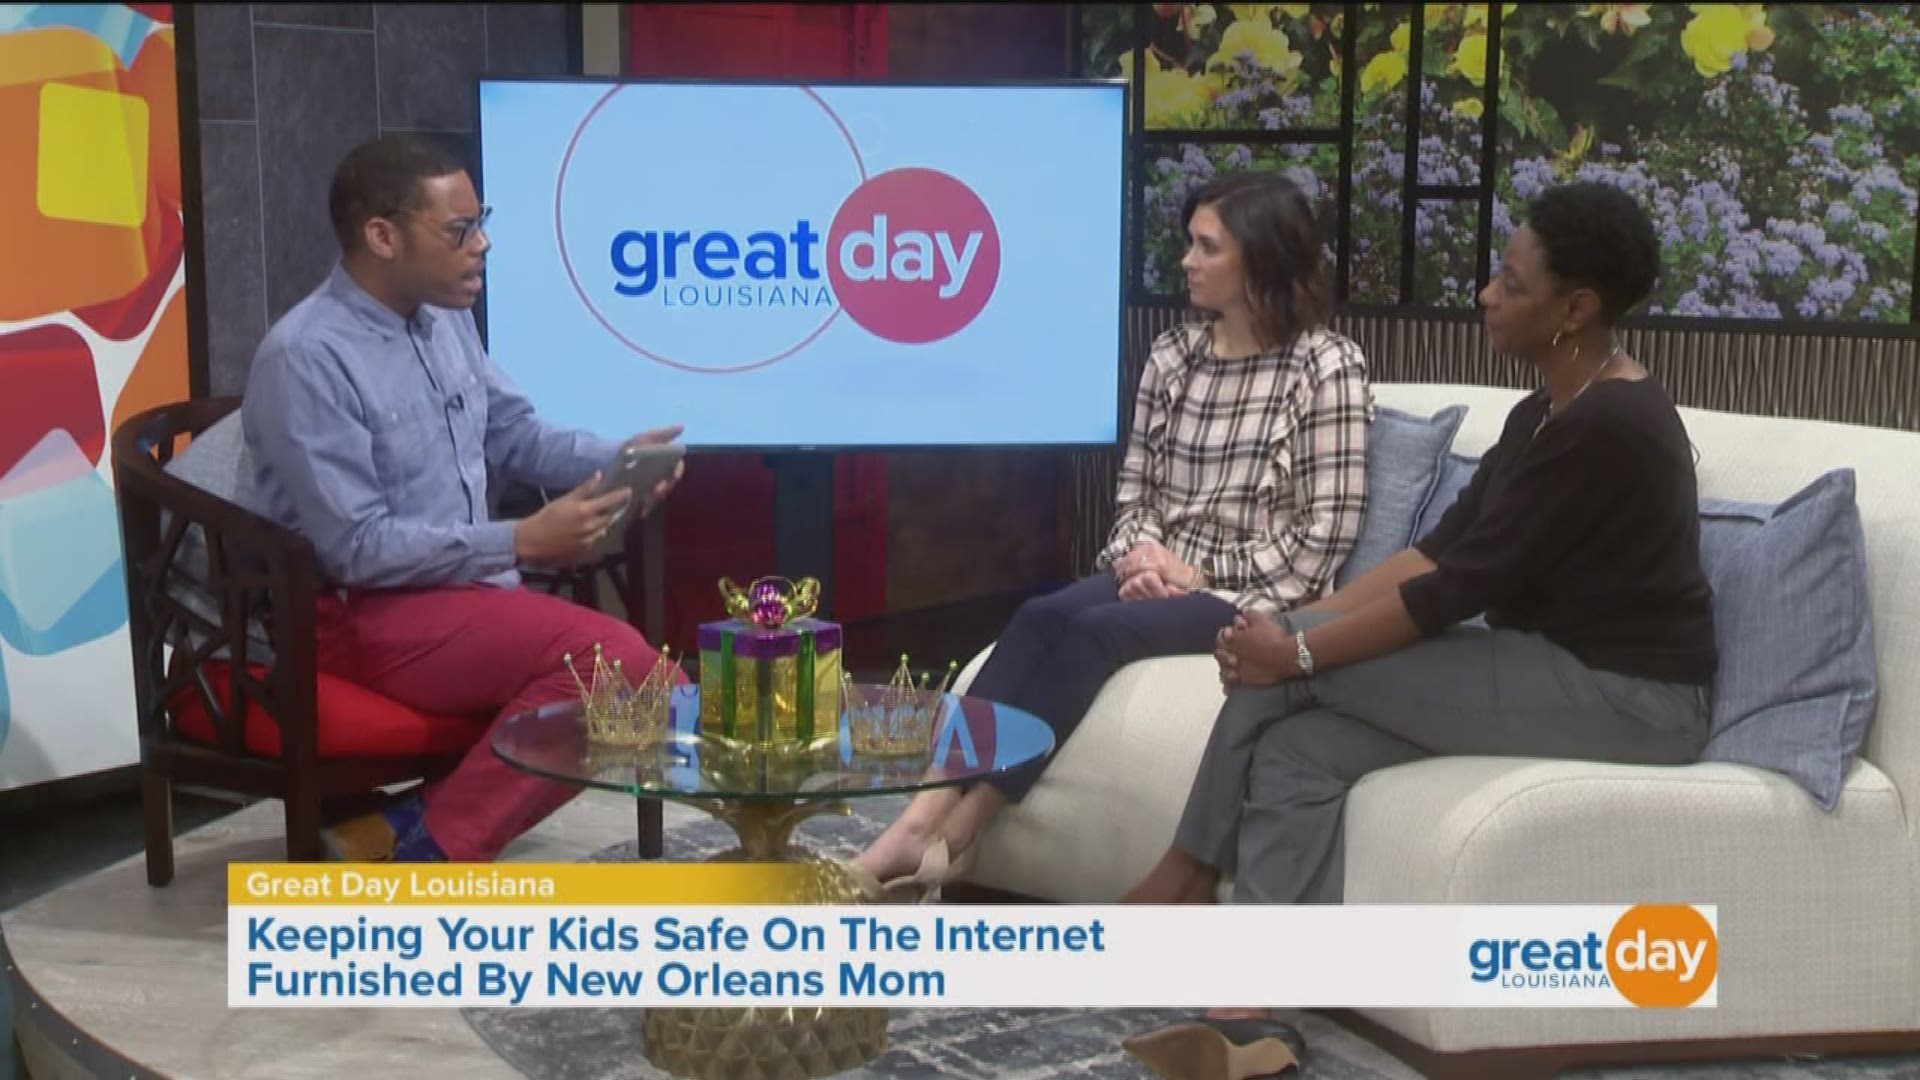 Patrice Wright with the Parenting Center at Children's Hospital and New Orleans mom, Angelina Vicknair discussed tips on how to keep children safe on the Internet.